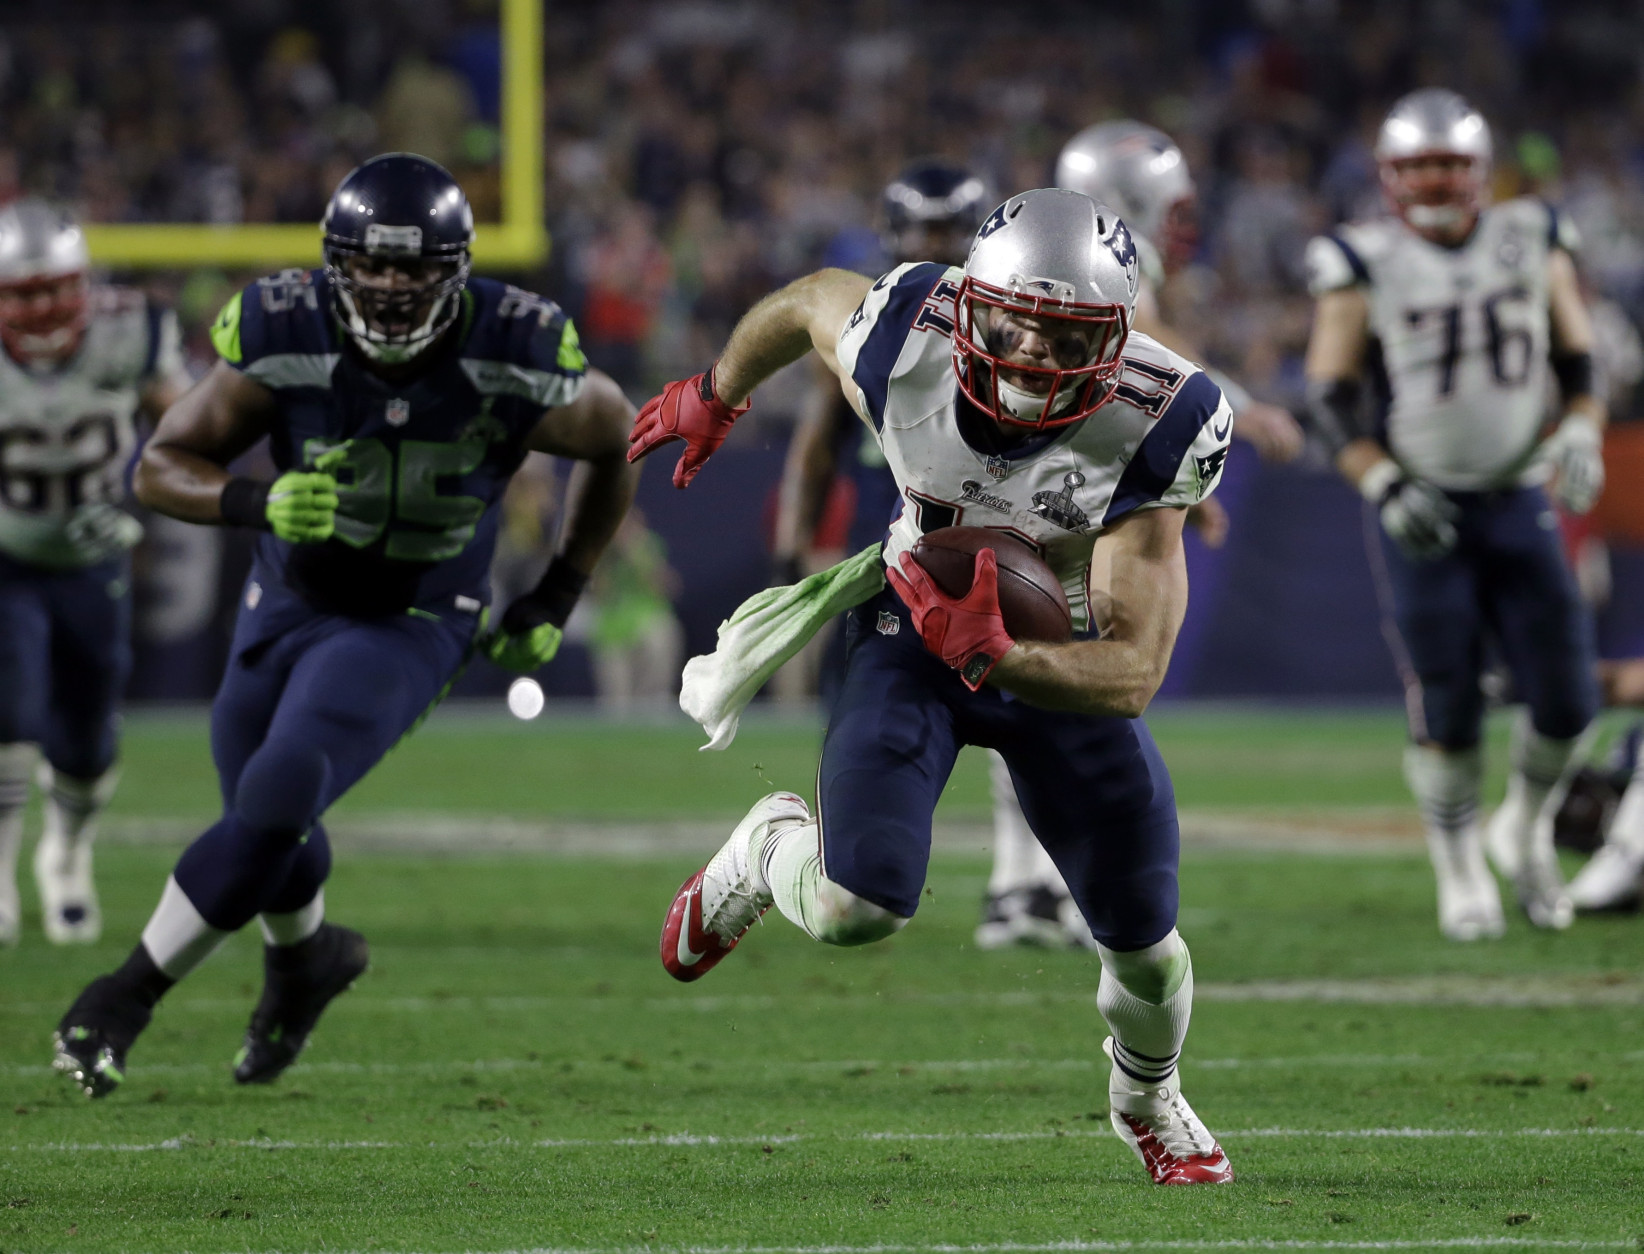 New England Patriots wide receiver Julian Edelman (11) runs during the second half of NFL Super Bowl XLIX football game against the Seattle Seahawks Sunday, Feb. 1, 2015, in Glendale, Ariz. (AP Photo/Mark Humphrey)